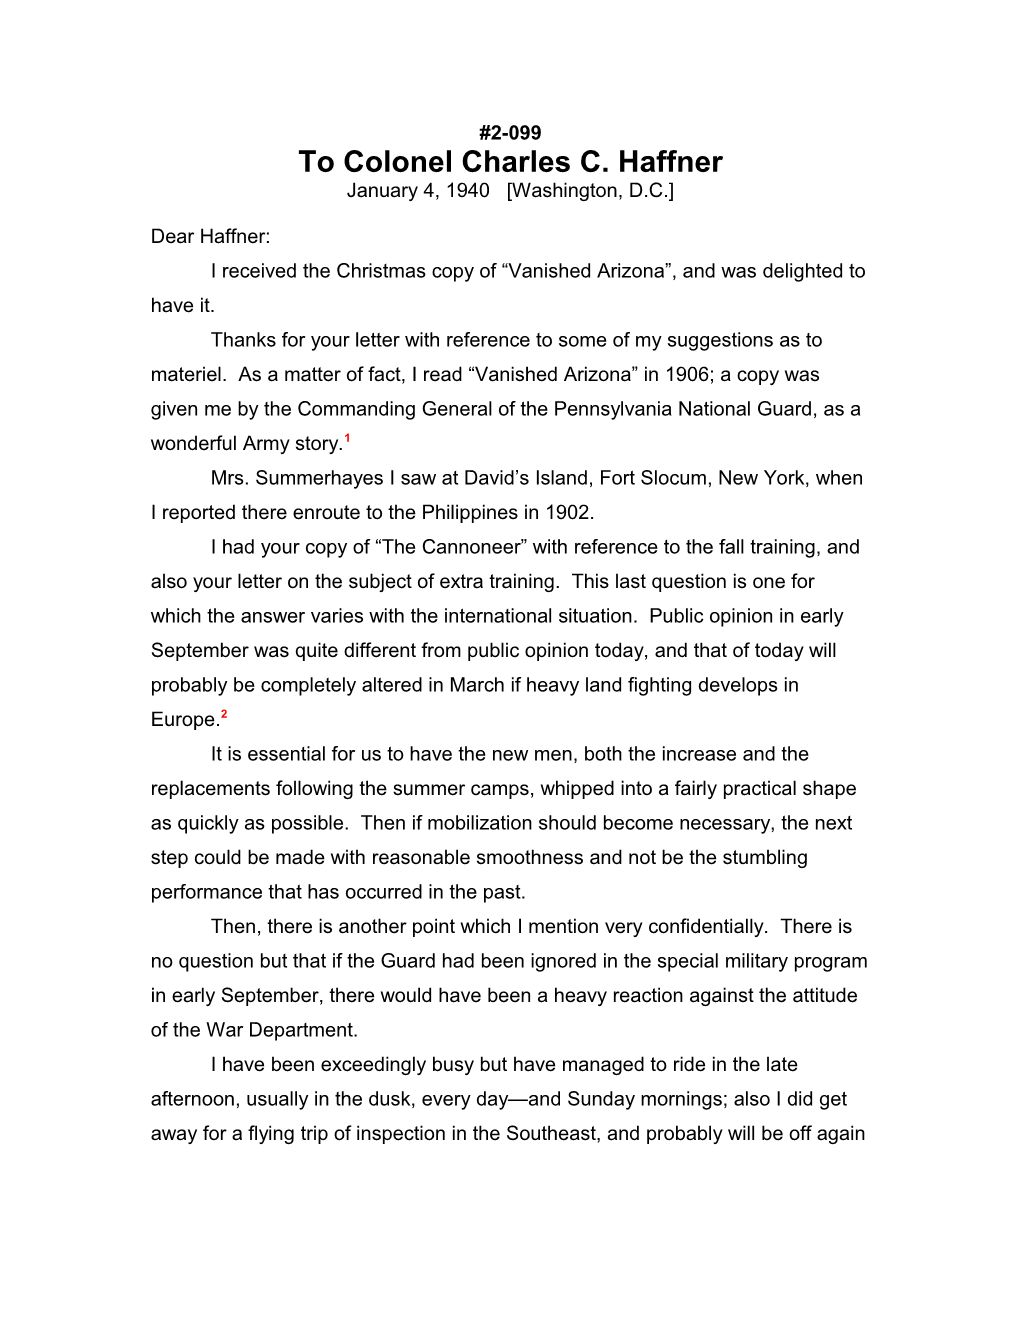 To Colonel Charles C. Haffner